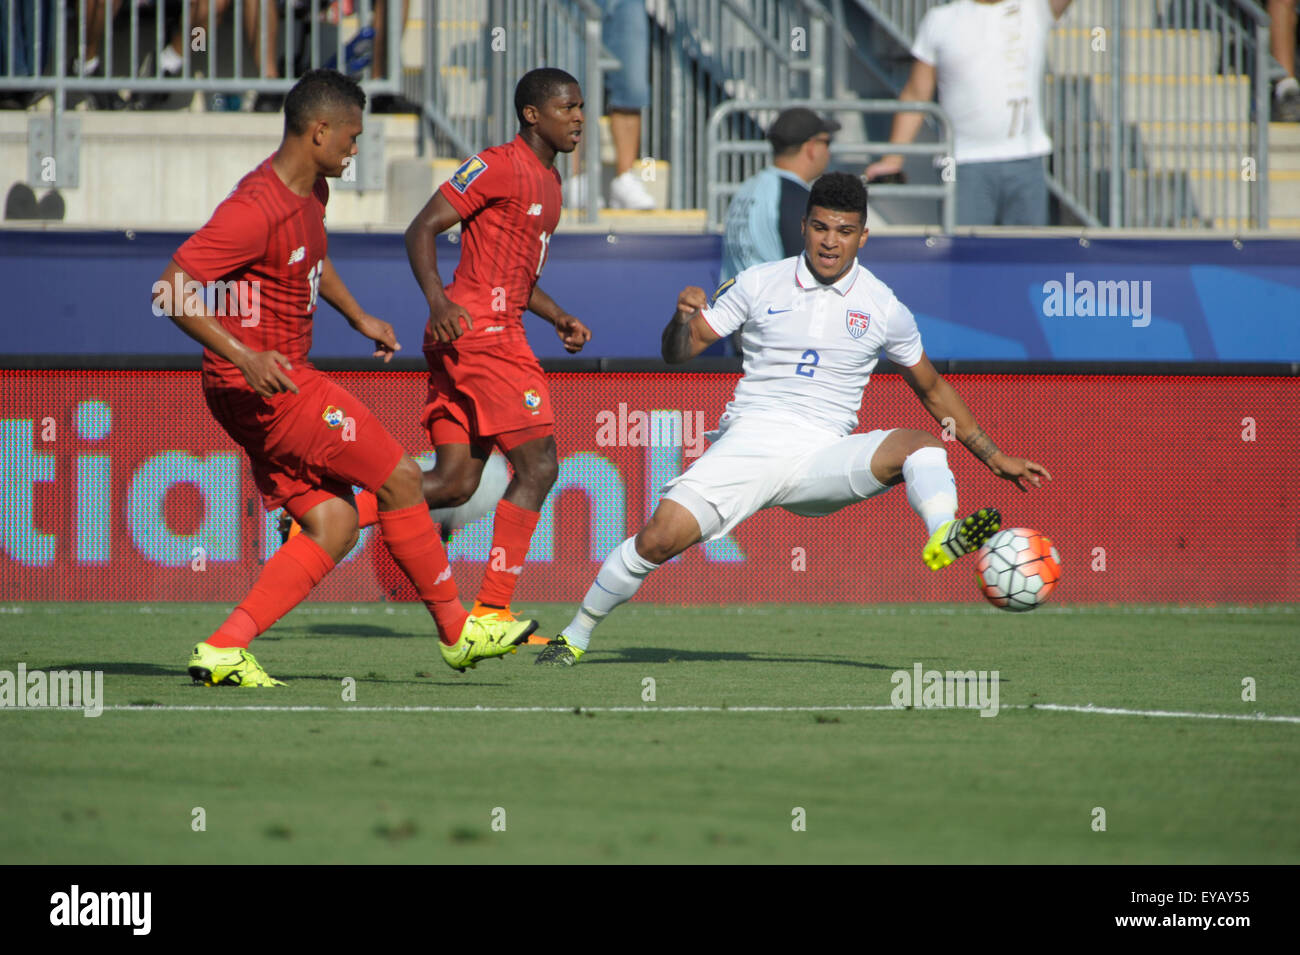 Chester, Pennsylvania, USA. 25th July, 2015. USA player DEANDRE YEDLIN(8) in action against PANAMA in the third place match which was played at PPL Park in Chester Pa (Credit Image: © Ricky Fitchett via ZUMA Wire) Stock Photo